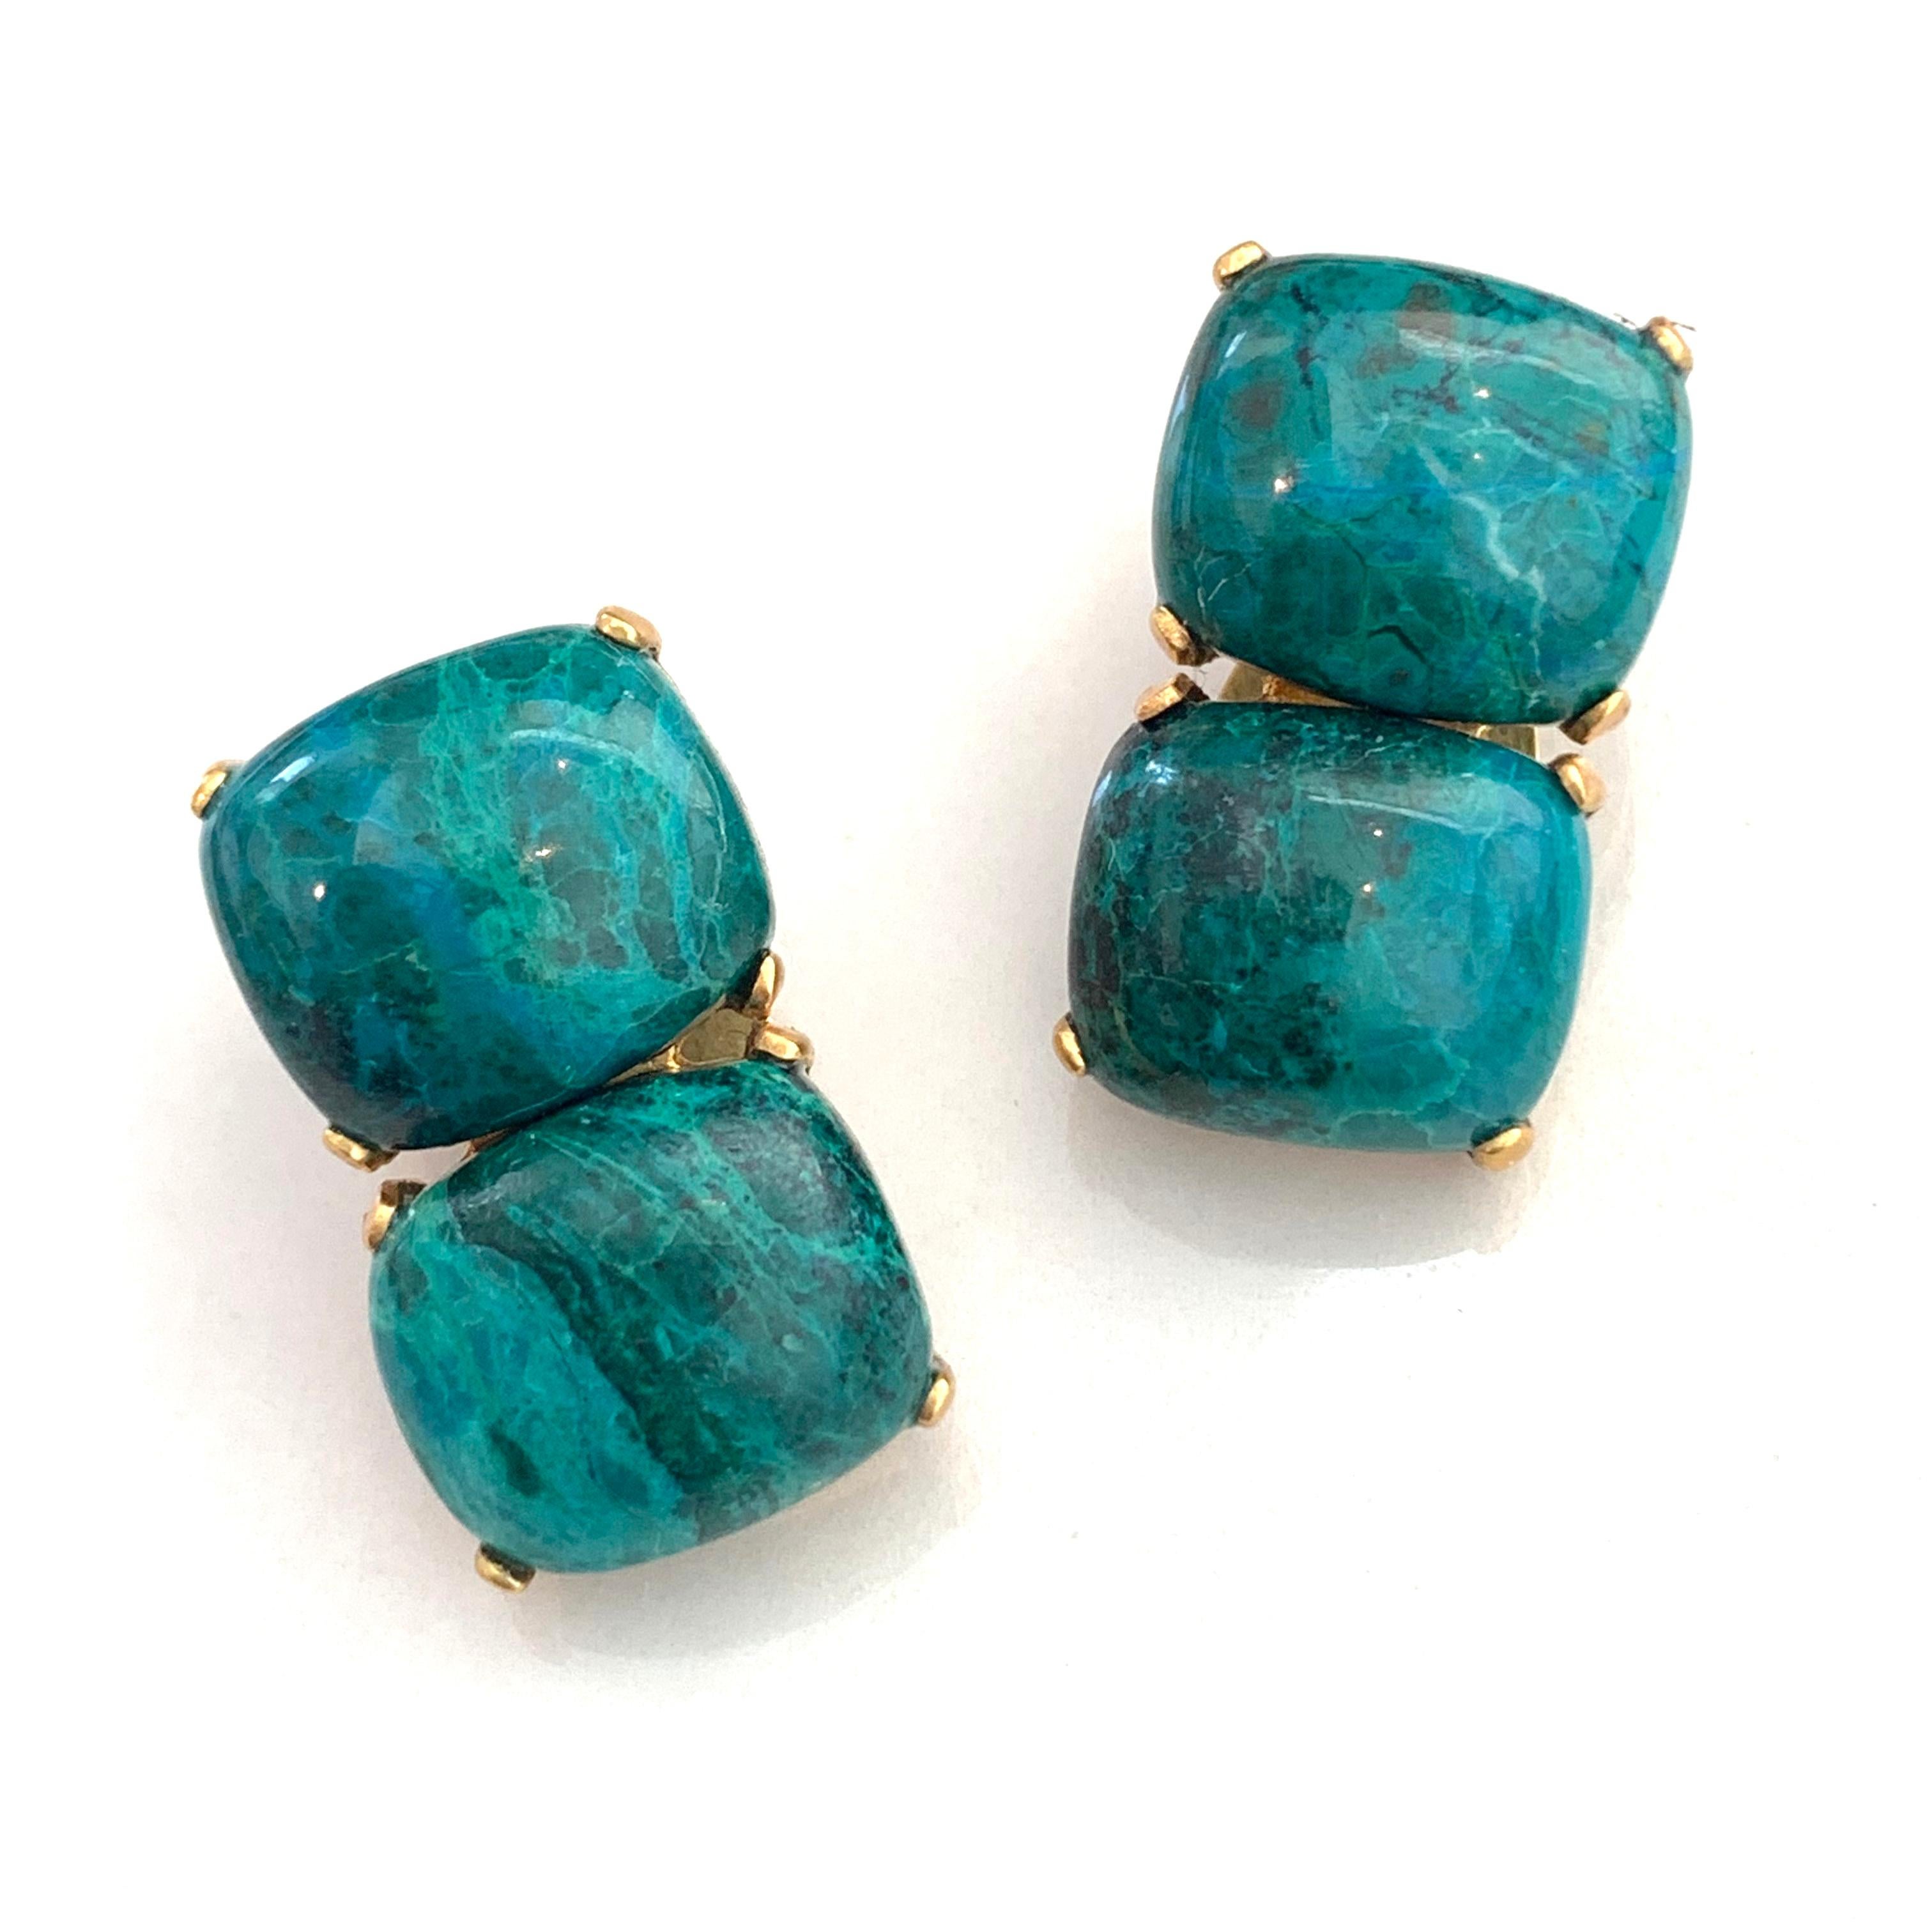 These stunning pair of earrings features 4 pieces of large cushion-shape cabochon-cut genuine chrysocolla, hand bezel-set in 18k yellow gold vermeil over sterling silver. The classic double design allows the earrings to show off the beautiful and